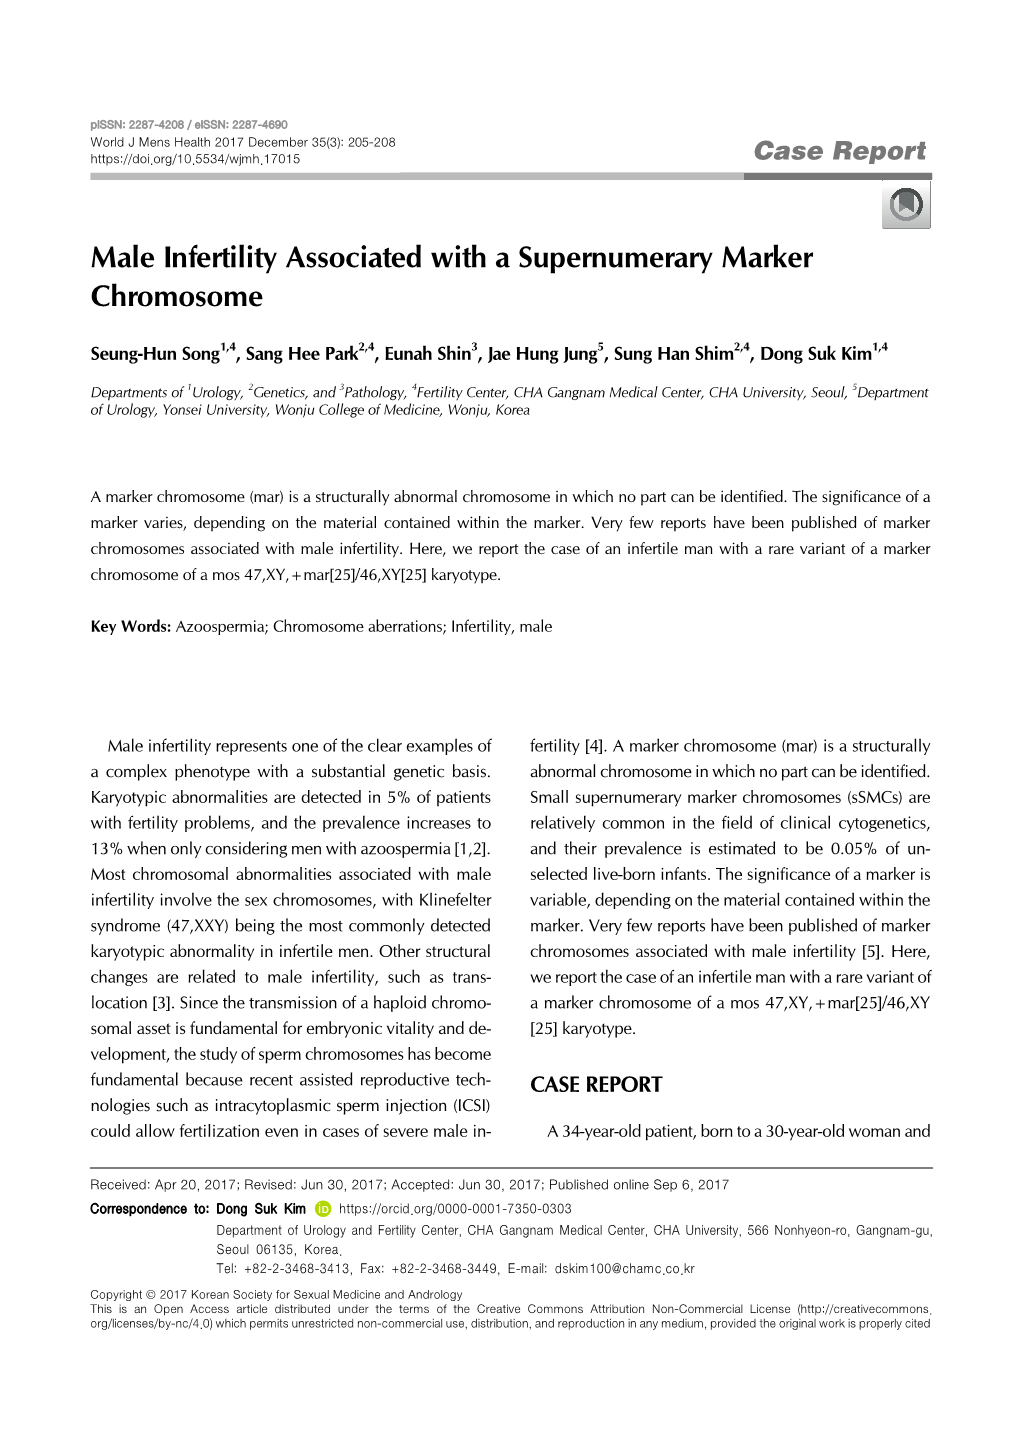 Male Infertility Associated with a Supernumerary Marker Chromosome